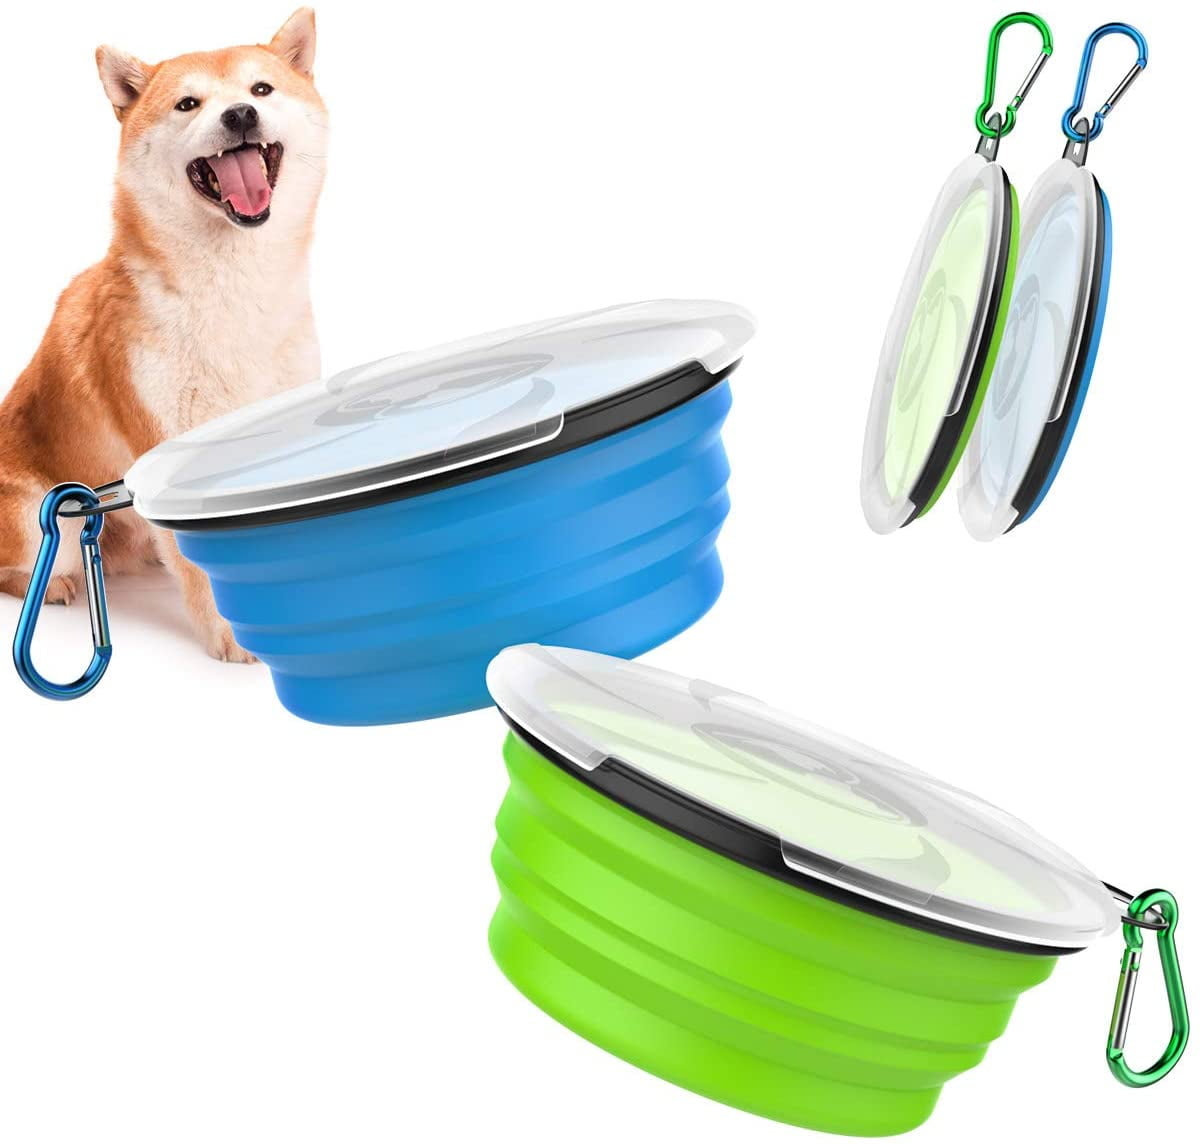 HYDAWAY Collapsible Insulated Bowl with Lid - 1 Quart (950ml), Silicone I  Large Collapsible Bowls for Camping, RV, Hiking & Travel, Portable Dog  Water